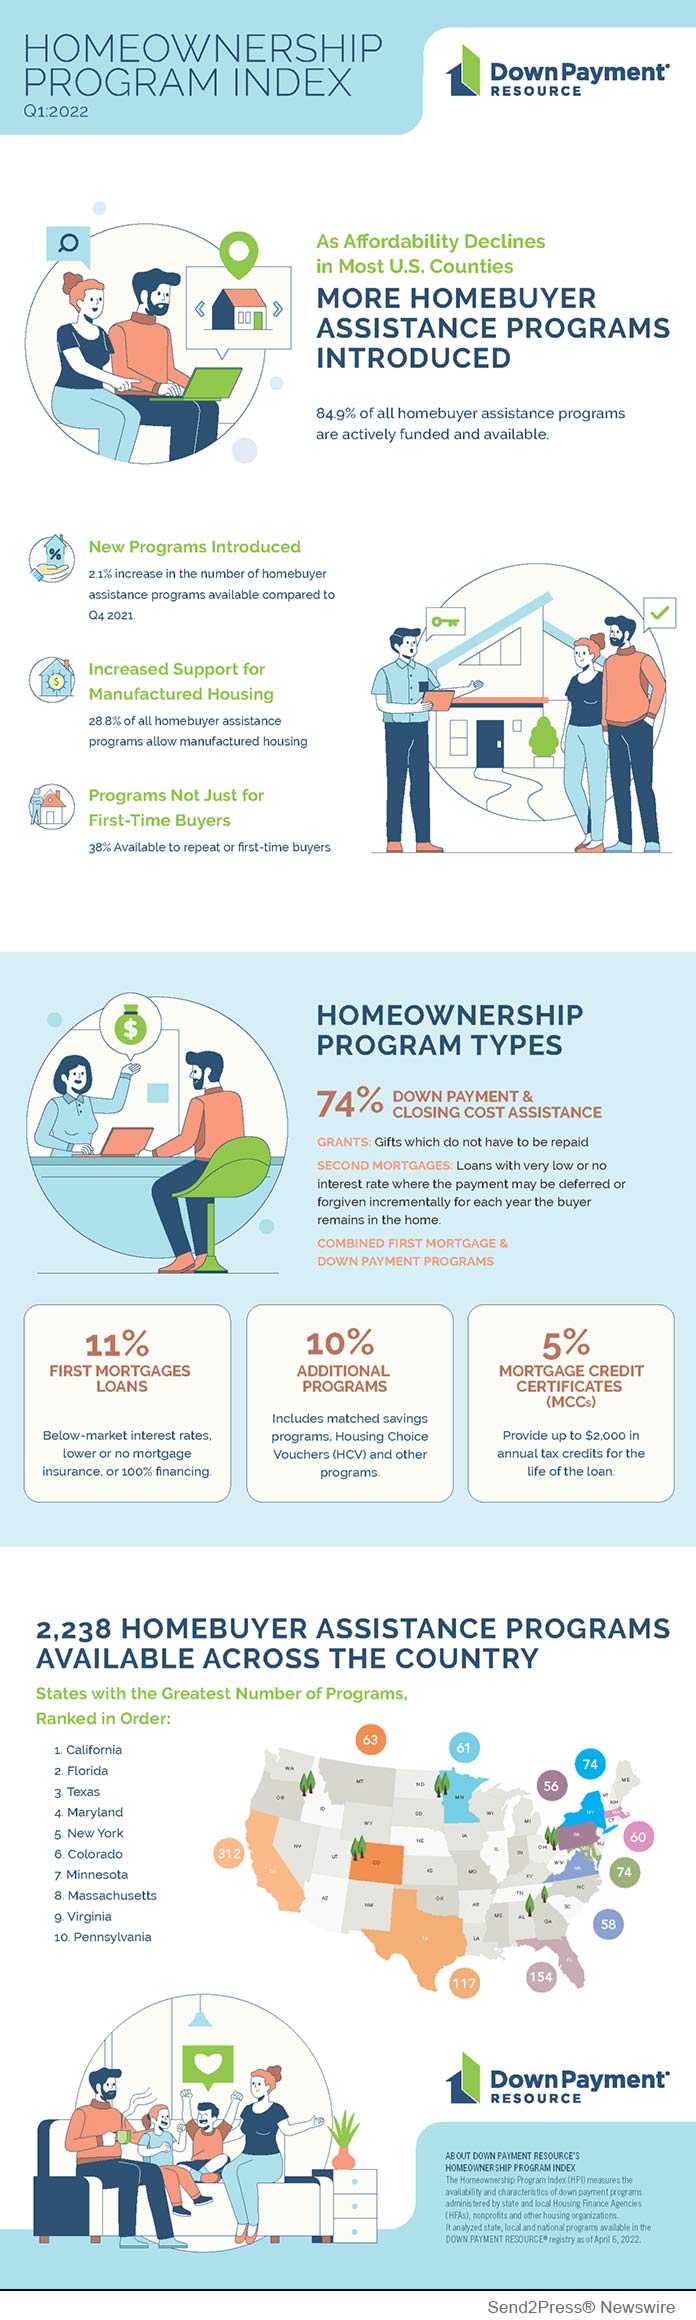 Down Payment Resource Q1 Infographic